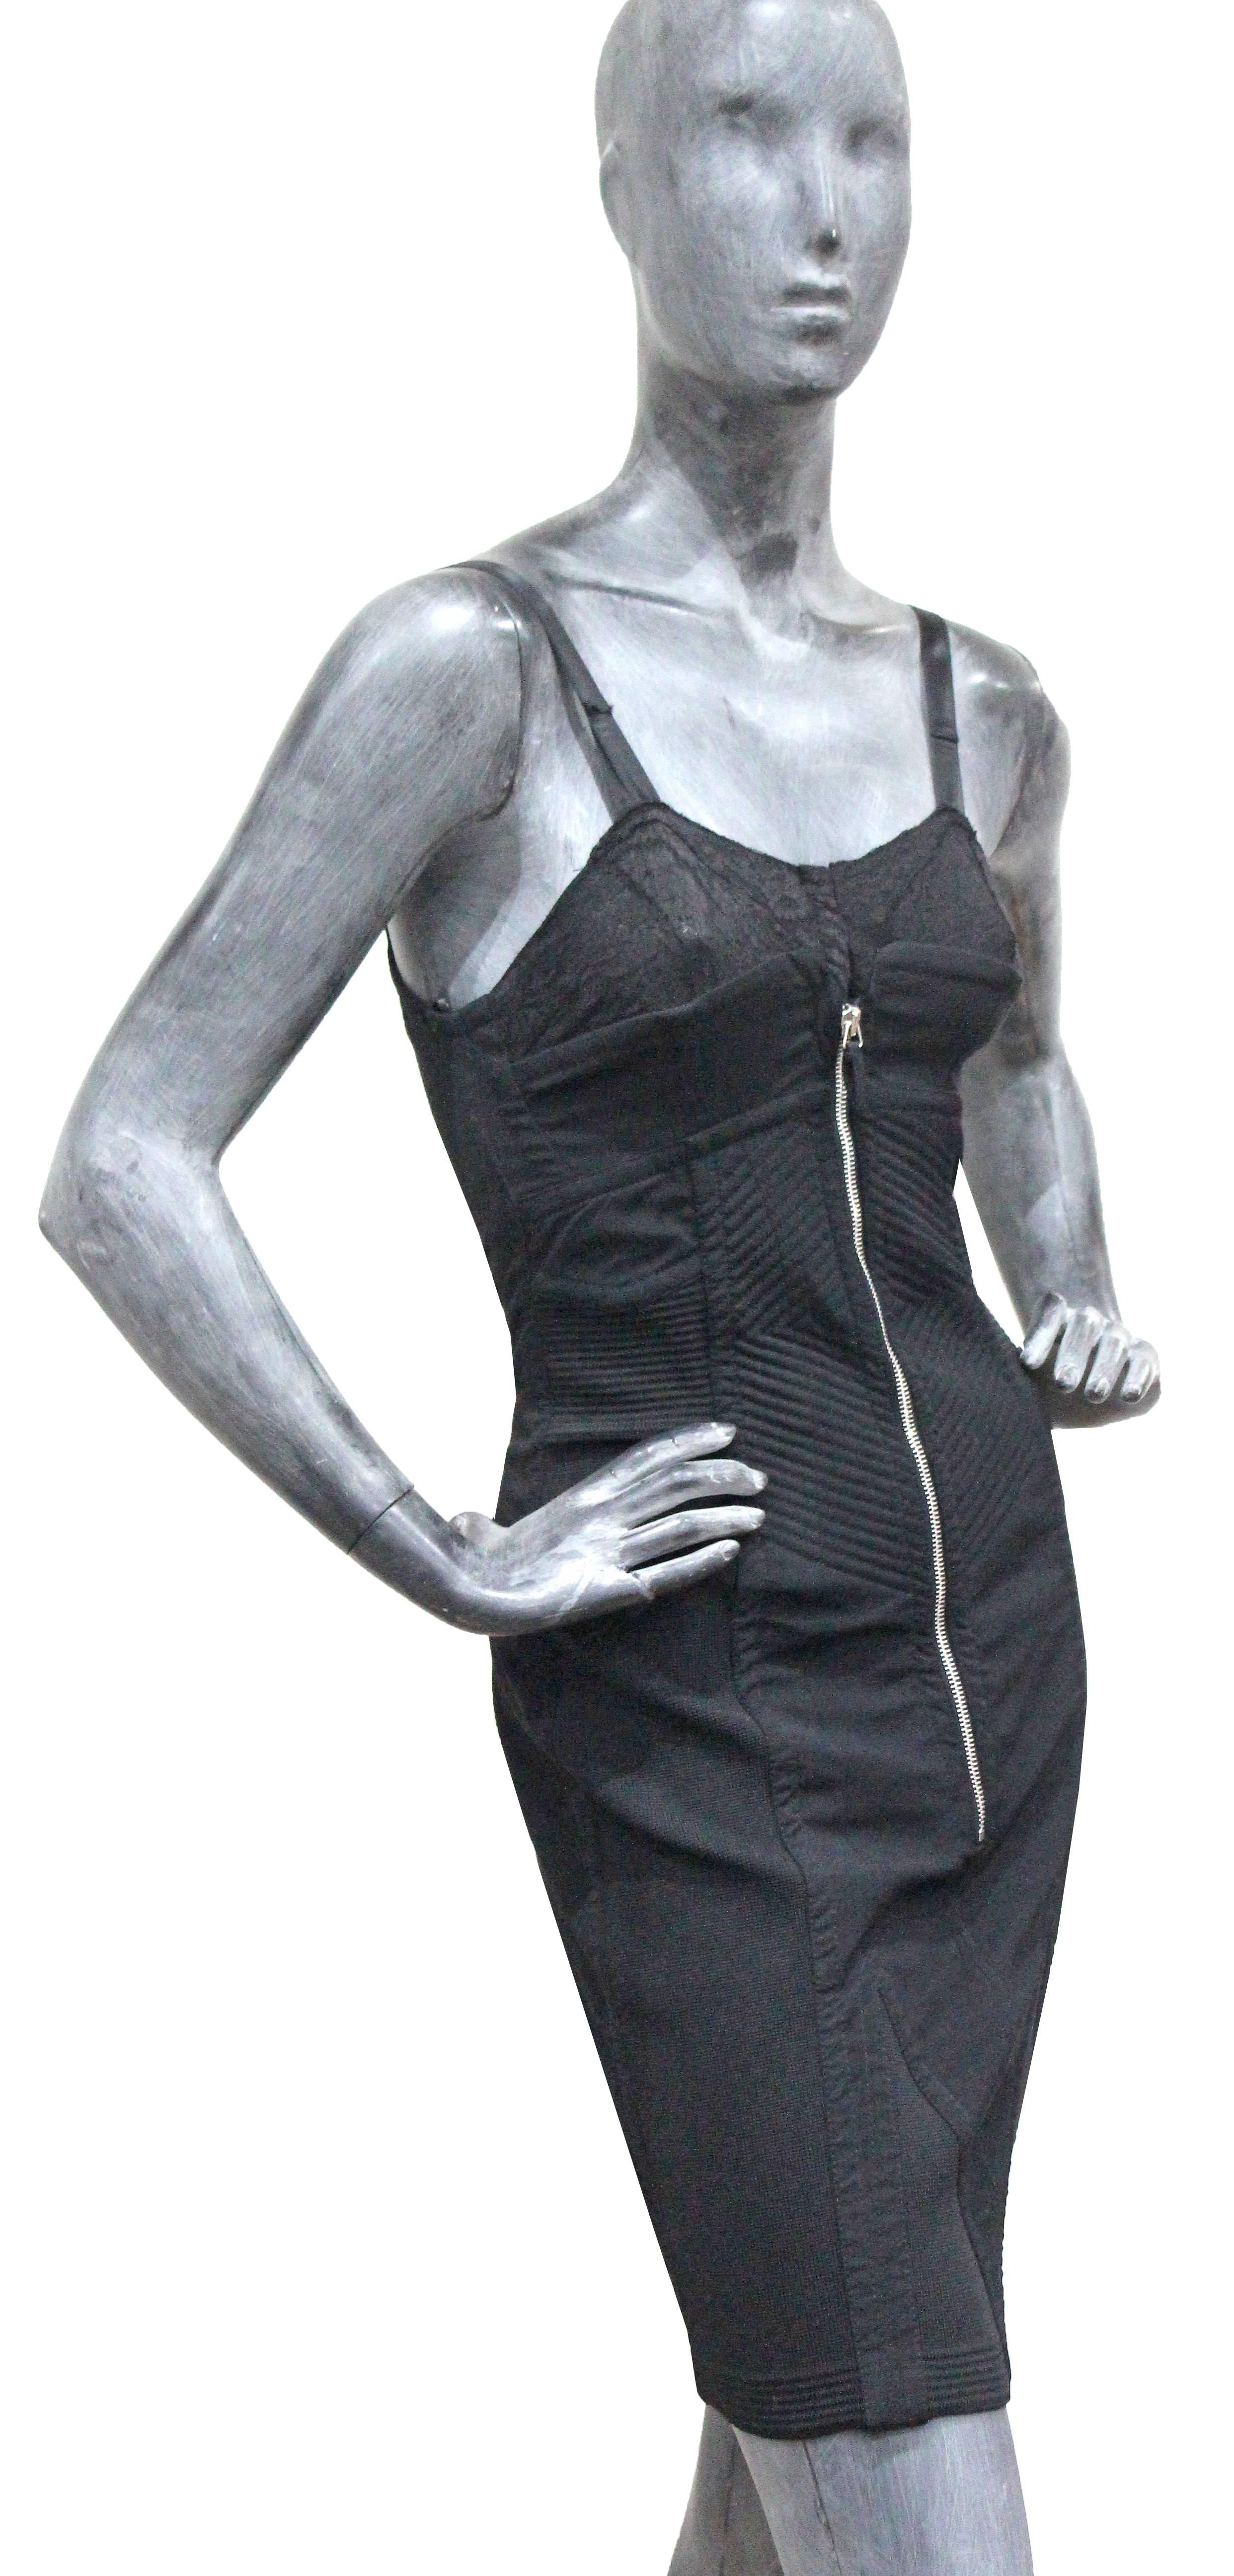 Iconic Jean Paul Gaultier lingerie style corset dress in black cotton and satin with a lace semi sheer bra and metal zipper at front. The dress has all its original tags and has never been worn.

Sizing: Fr 34 / GB 6 / XS - Small

The fabric has